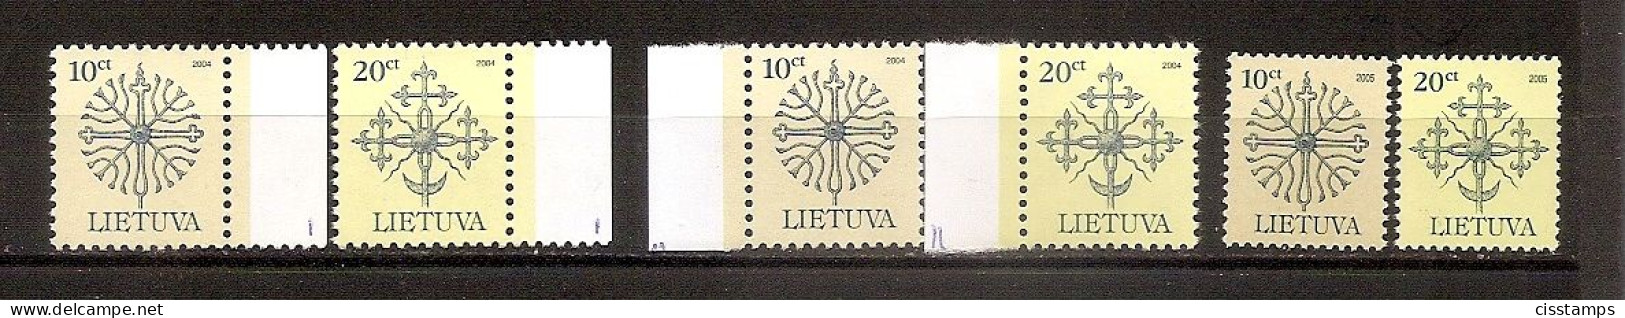 LITHUANIA 2004-2005●Definitive●Forged Tops Of Monuments●see Description●MNH - Litauen